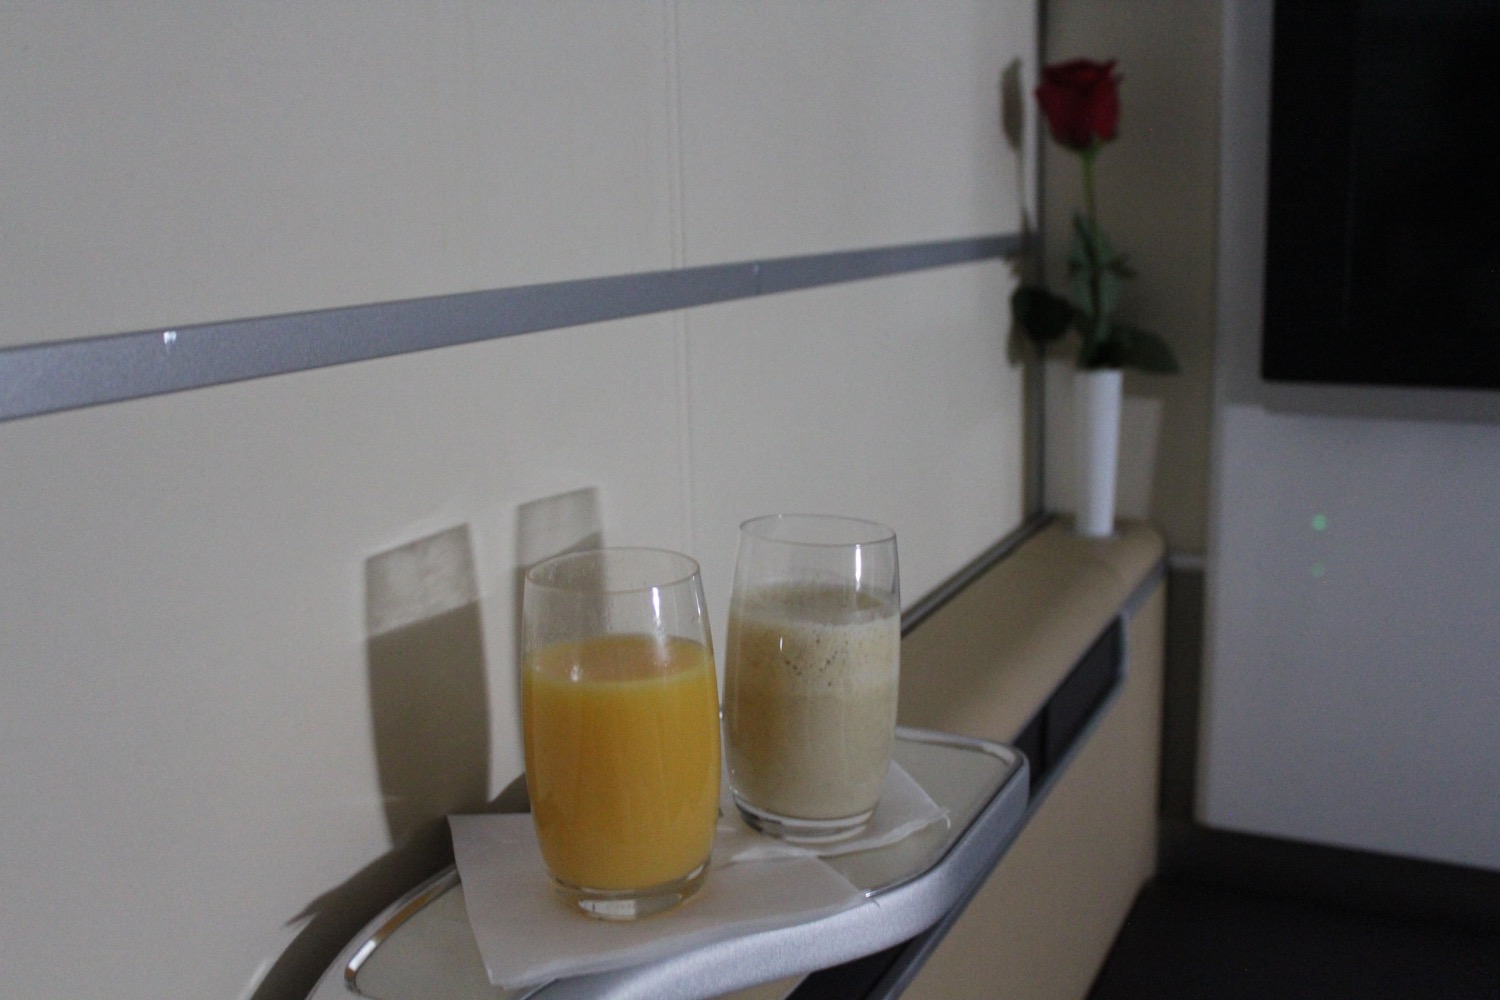 two glasses of orange juice on a tray